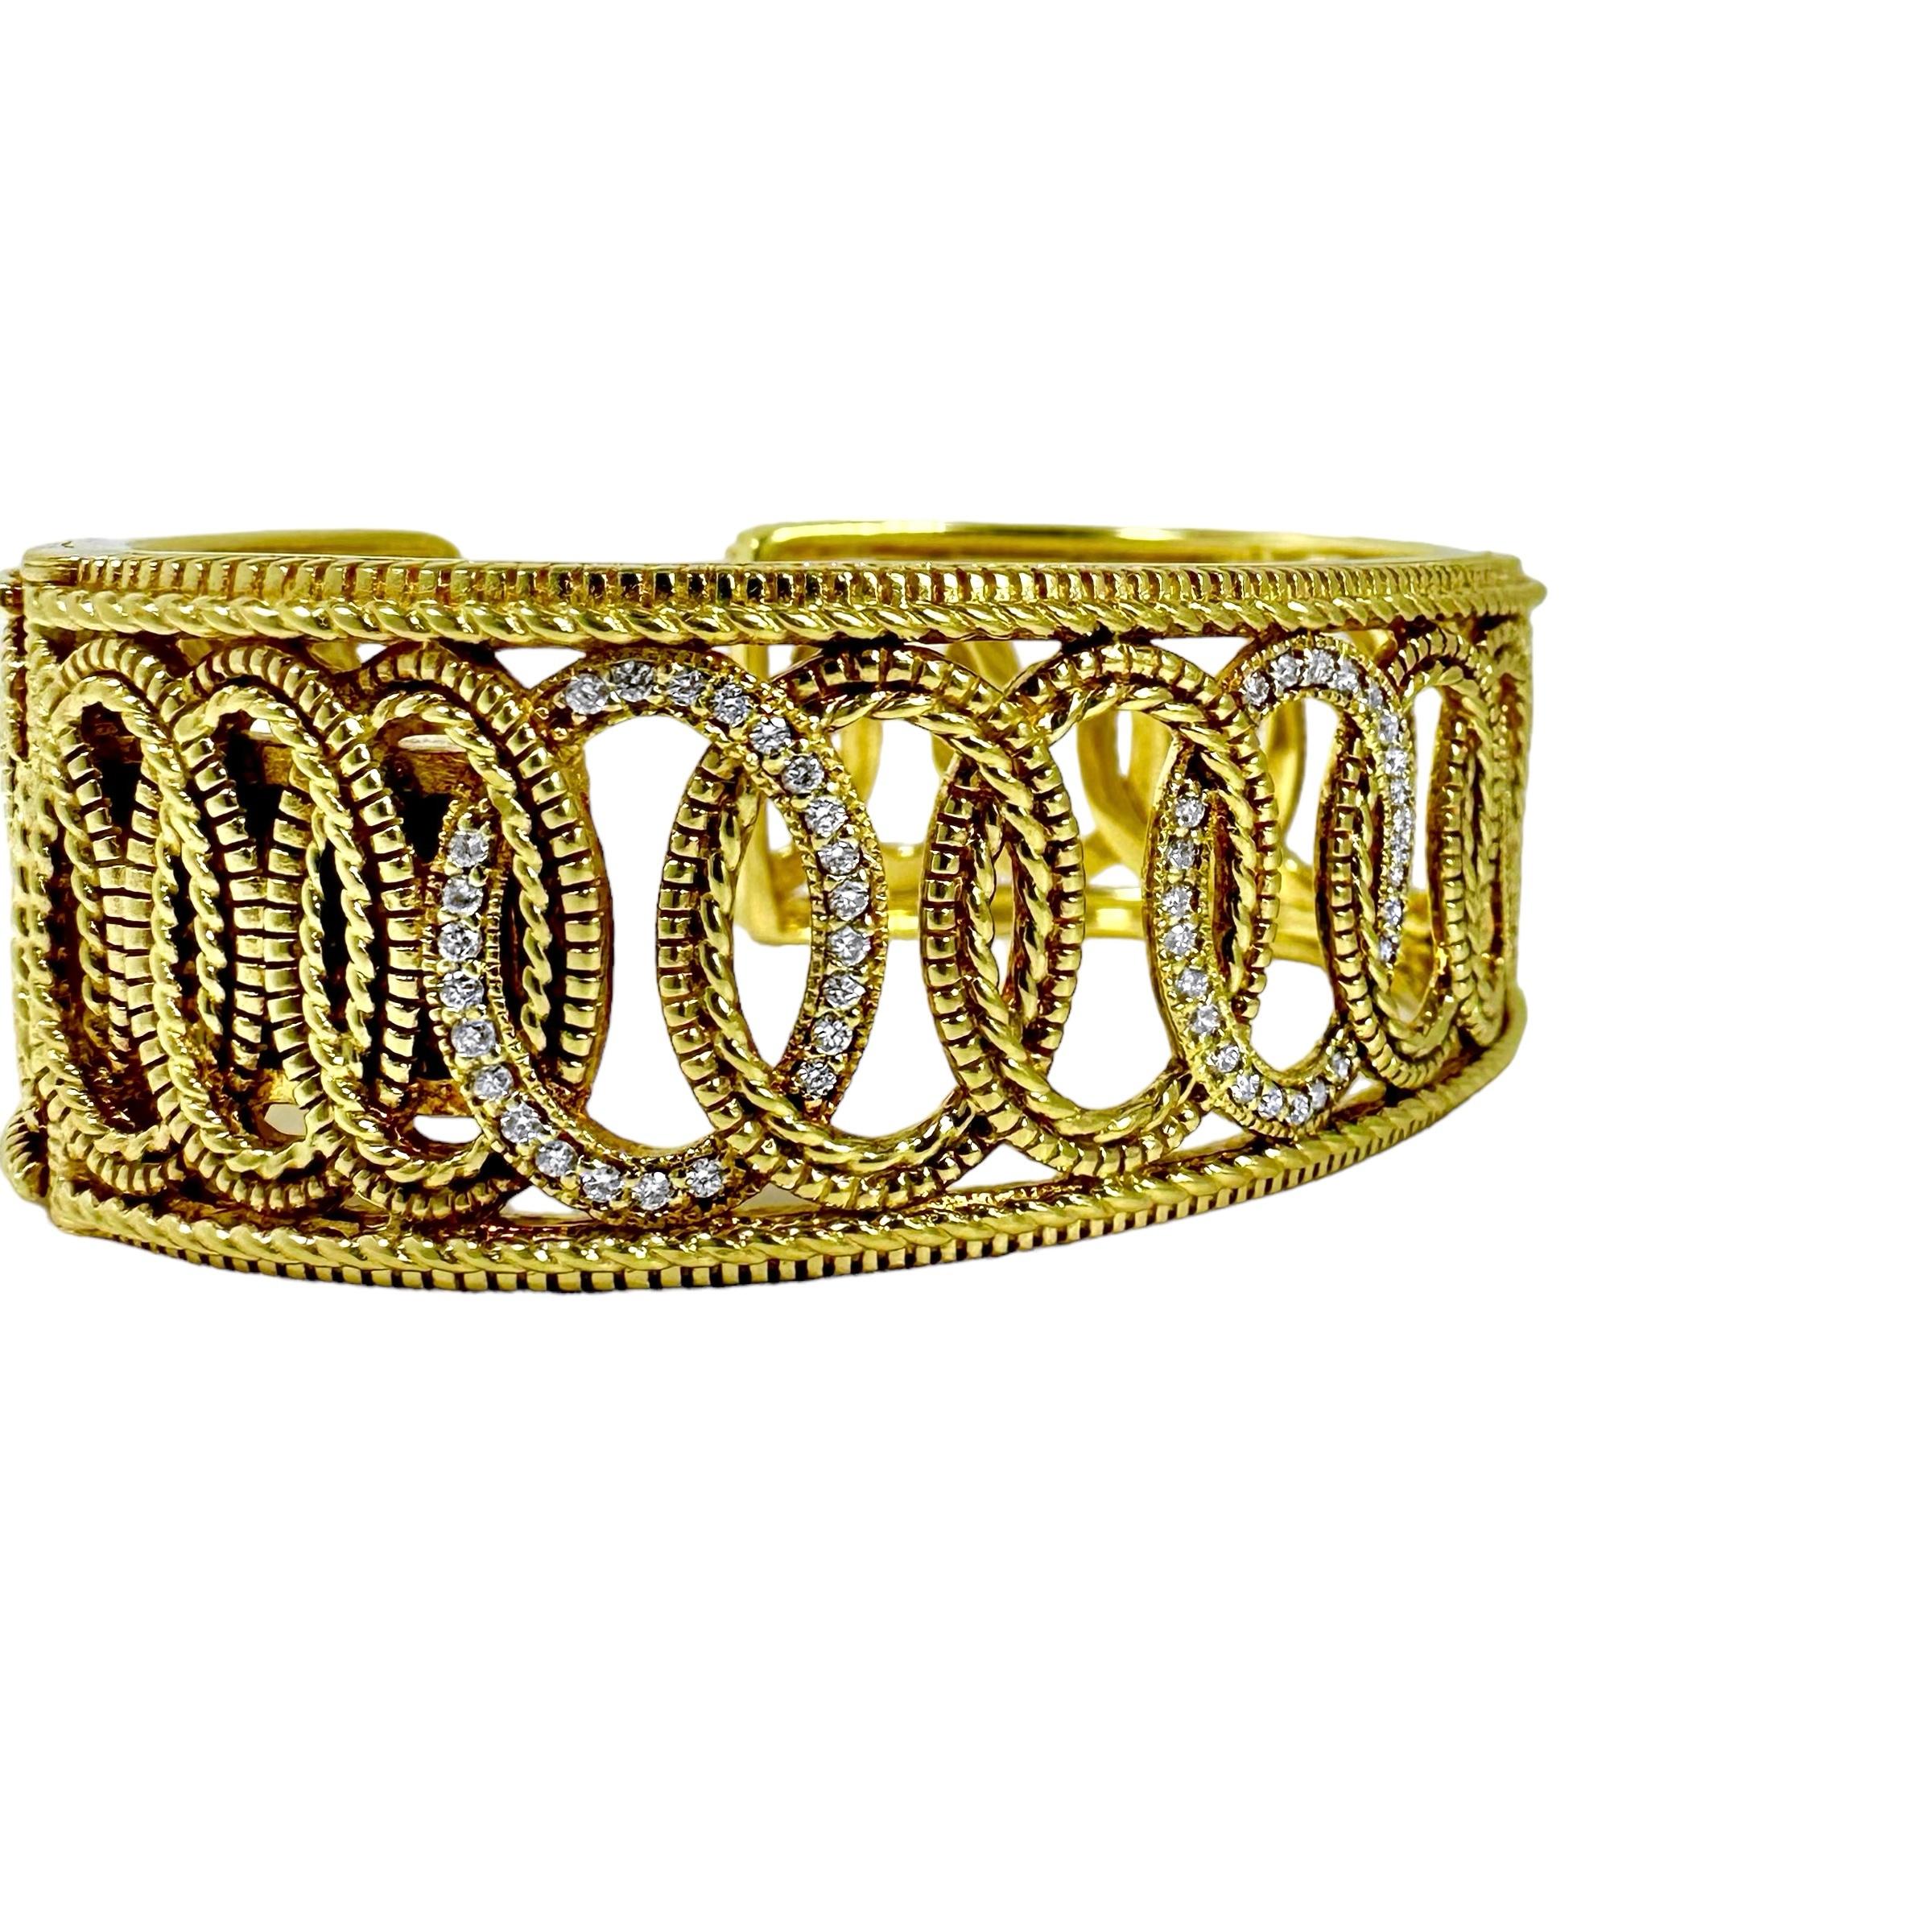 Casual Judith Ripka 18k Gold Hinged, Cuff Bracelet with Diamonds 7/8 inch Wide  2